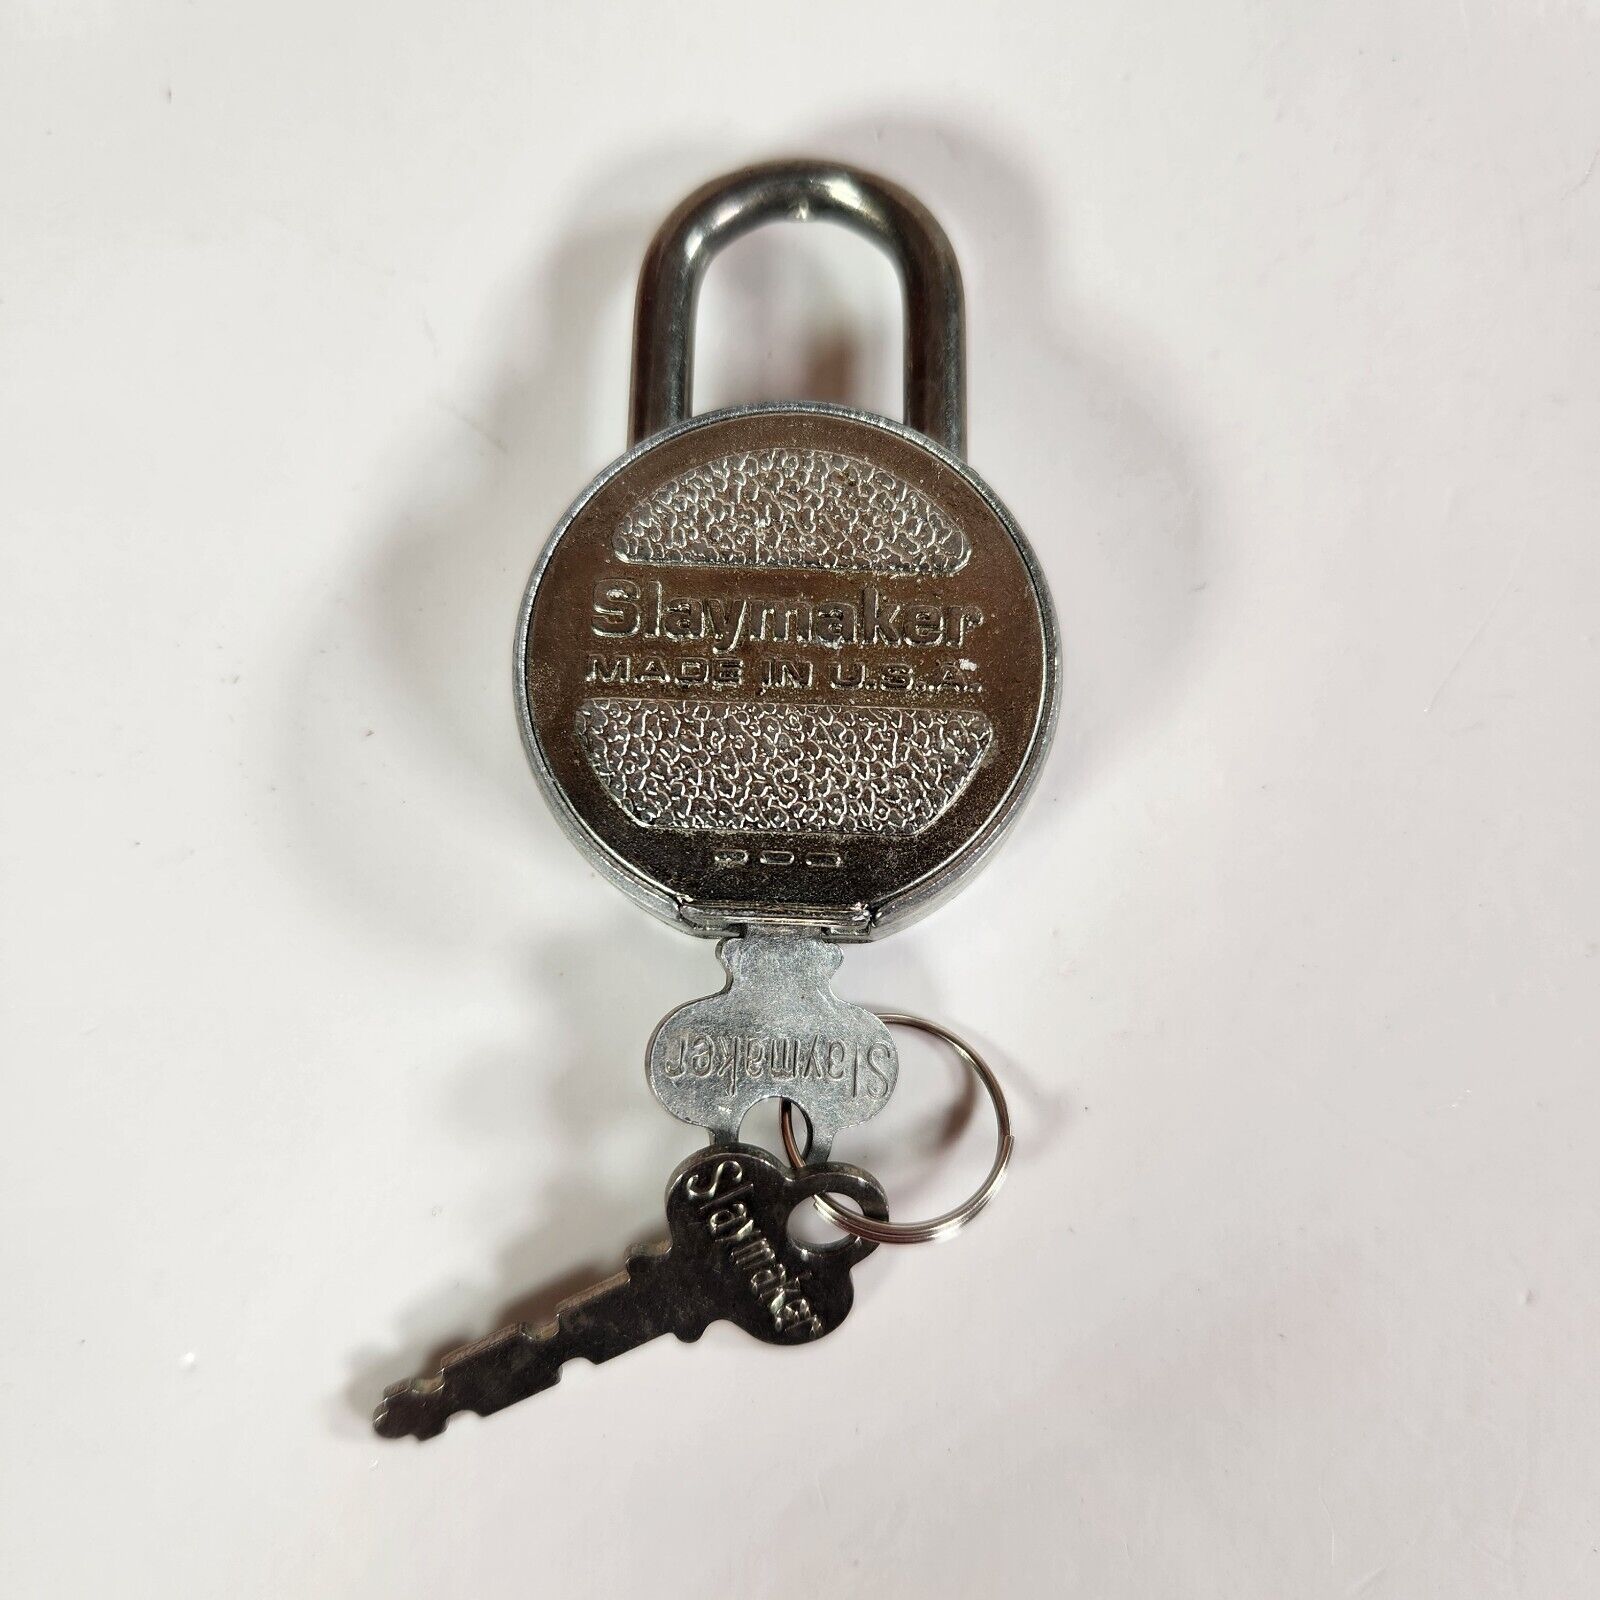 Vintage Slaymaker Padlock With 2 Keys Made In The USA